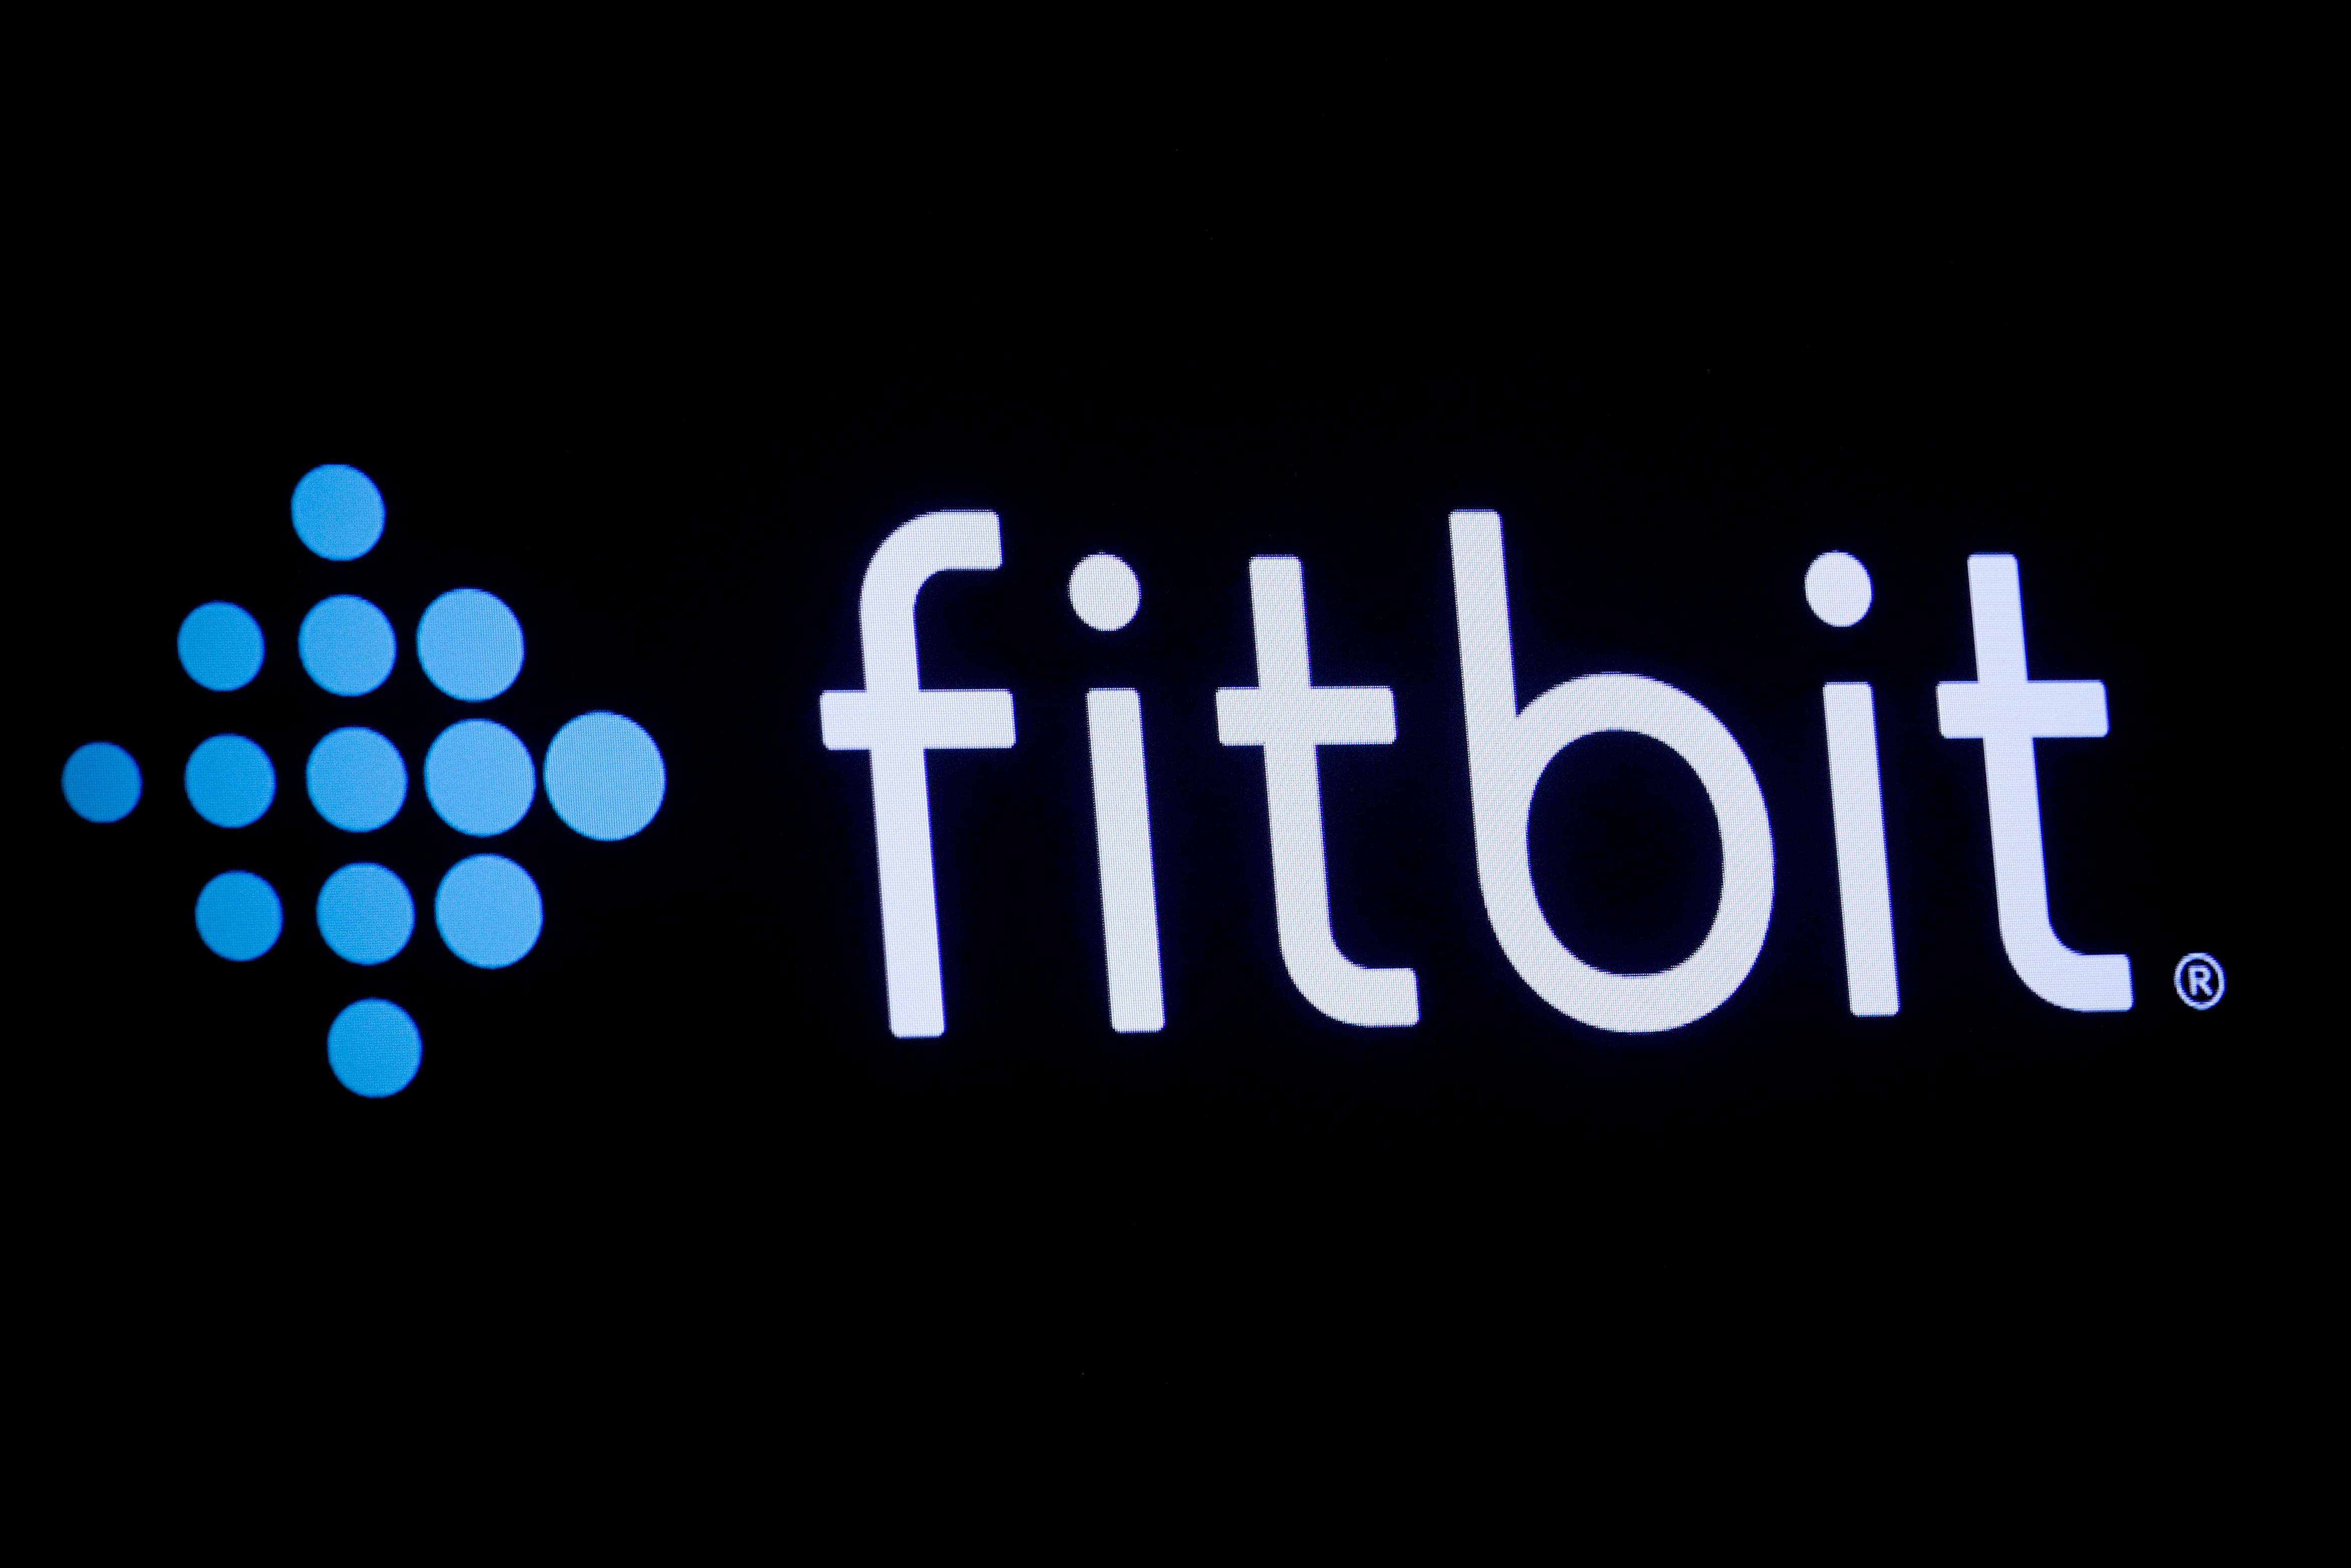 The logo for wearable device maker Fitbit Inc. is displayed on a screen at NYSE floor in New York (Photo: REUTERS/Brendan McDermid)